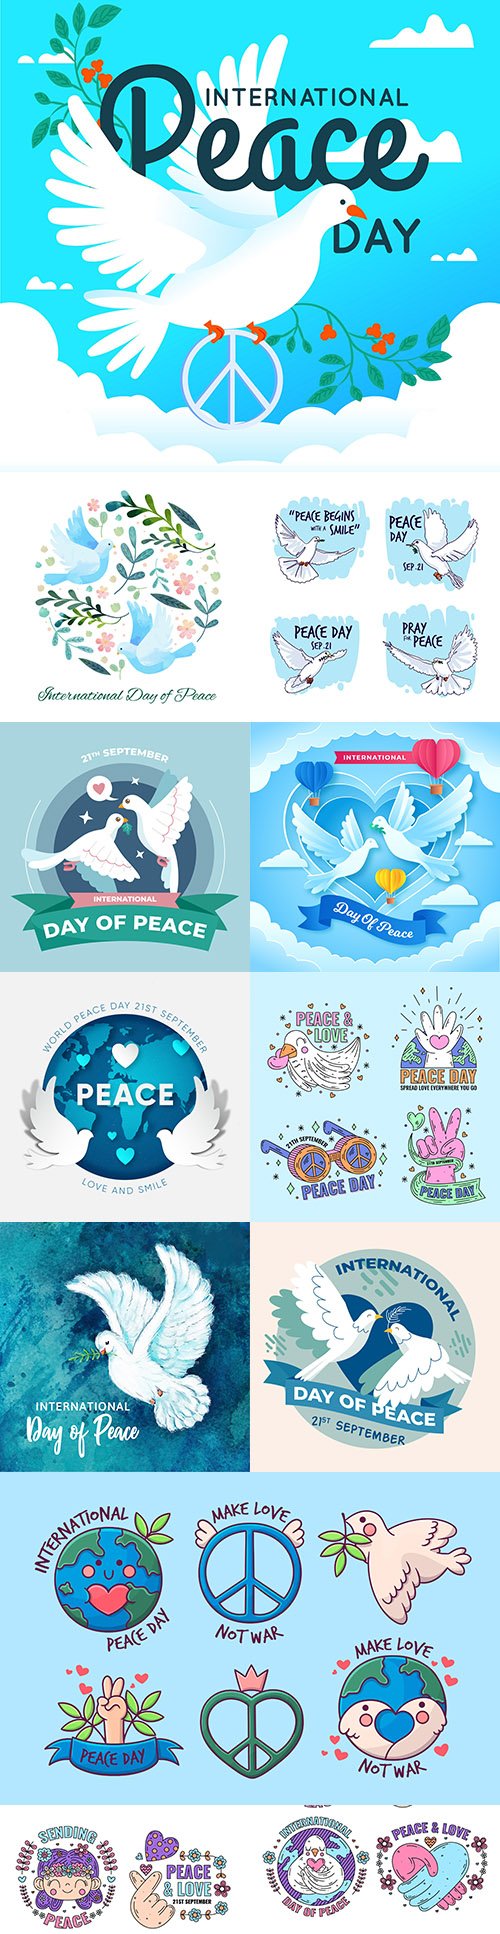 International Day of Peace with Pigeons and Hearts